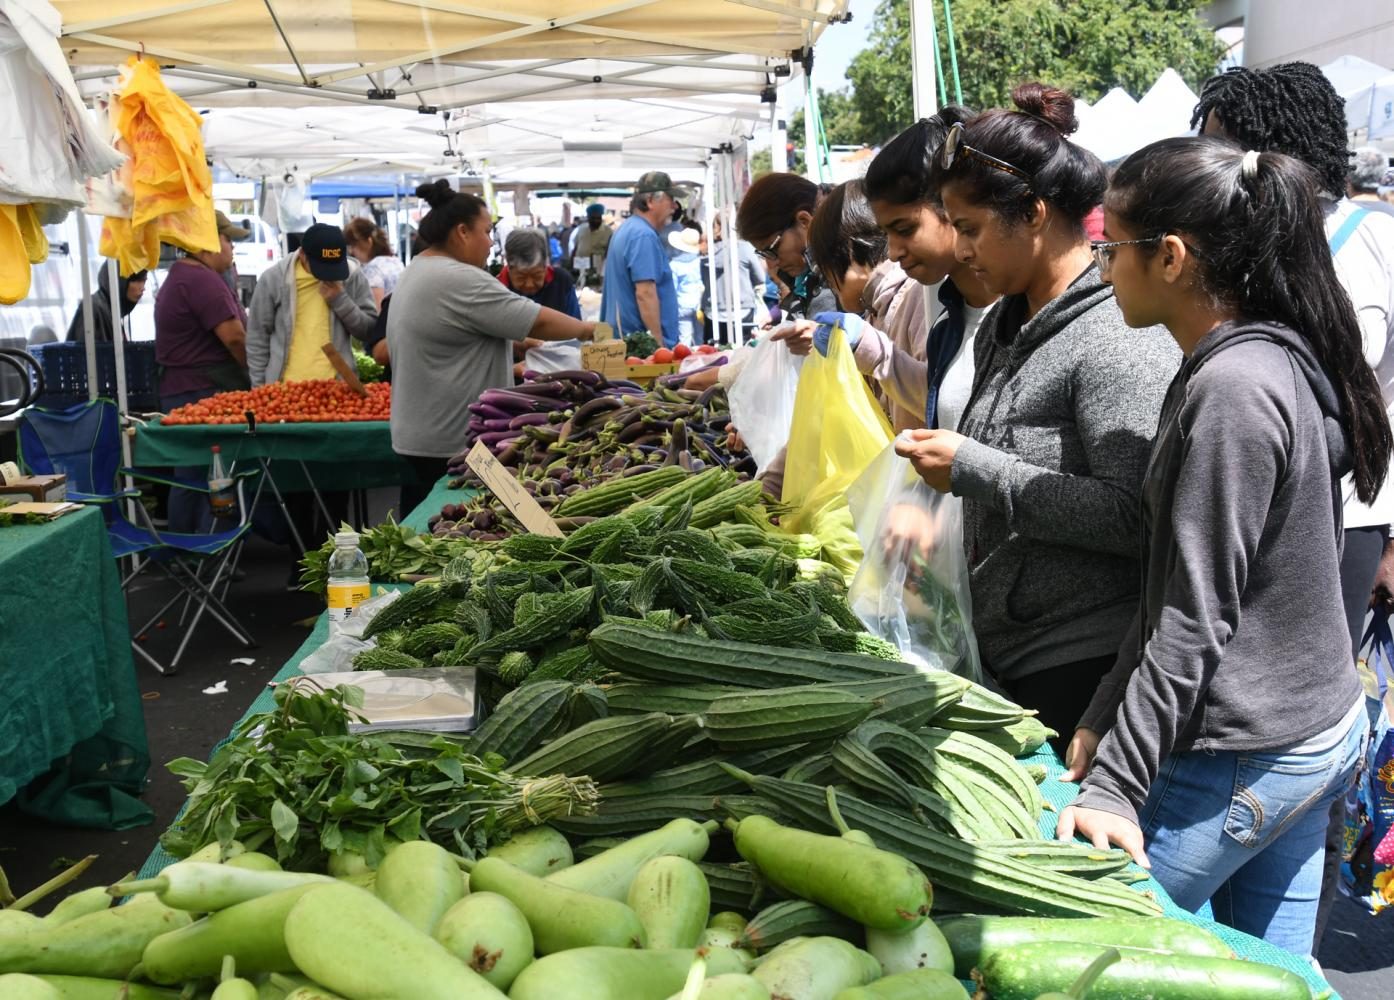 Shoppers+sift+through+fruits+and+vegetables+at+the+farmers+market+in+downtown+Hayward+on+Saturday+near+City+Hall.+The+market+has+been+an+institution+in+the+city+for+more+than+20+years+and+is+open+year+round%2C+every+Saturday+from+9+a.m.+to+1+p.m%2C+rain+or+shine.+The+market+features+more+than+35+farmers%2C+food+purveyors%2C+and+artisans+selling+locally+grown+organic+produce%2C+seafood%2C+pastured+eggs%2C+cheese%2C+nuts%2C+honey+breads%2C+baked+goods%2C+plants%2C+fresh-cut+flowers%2C+pre-packed+cold+and+hot+foods%2C+artisanal+crafts+and+jewelry.